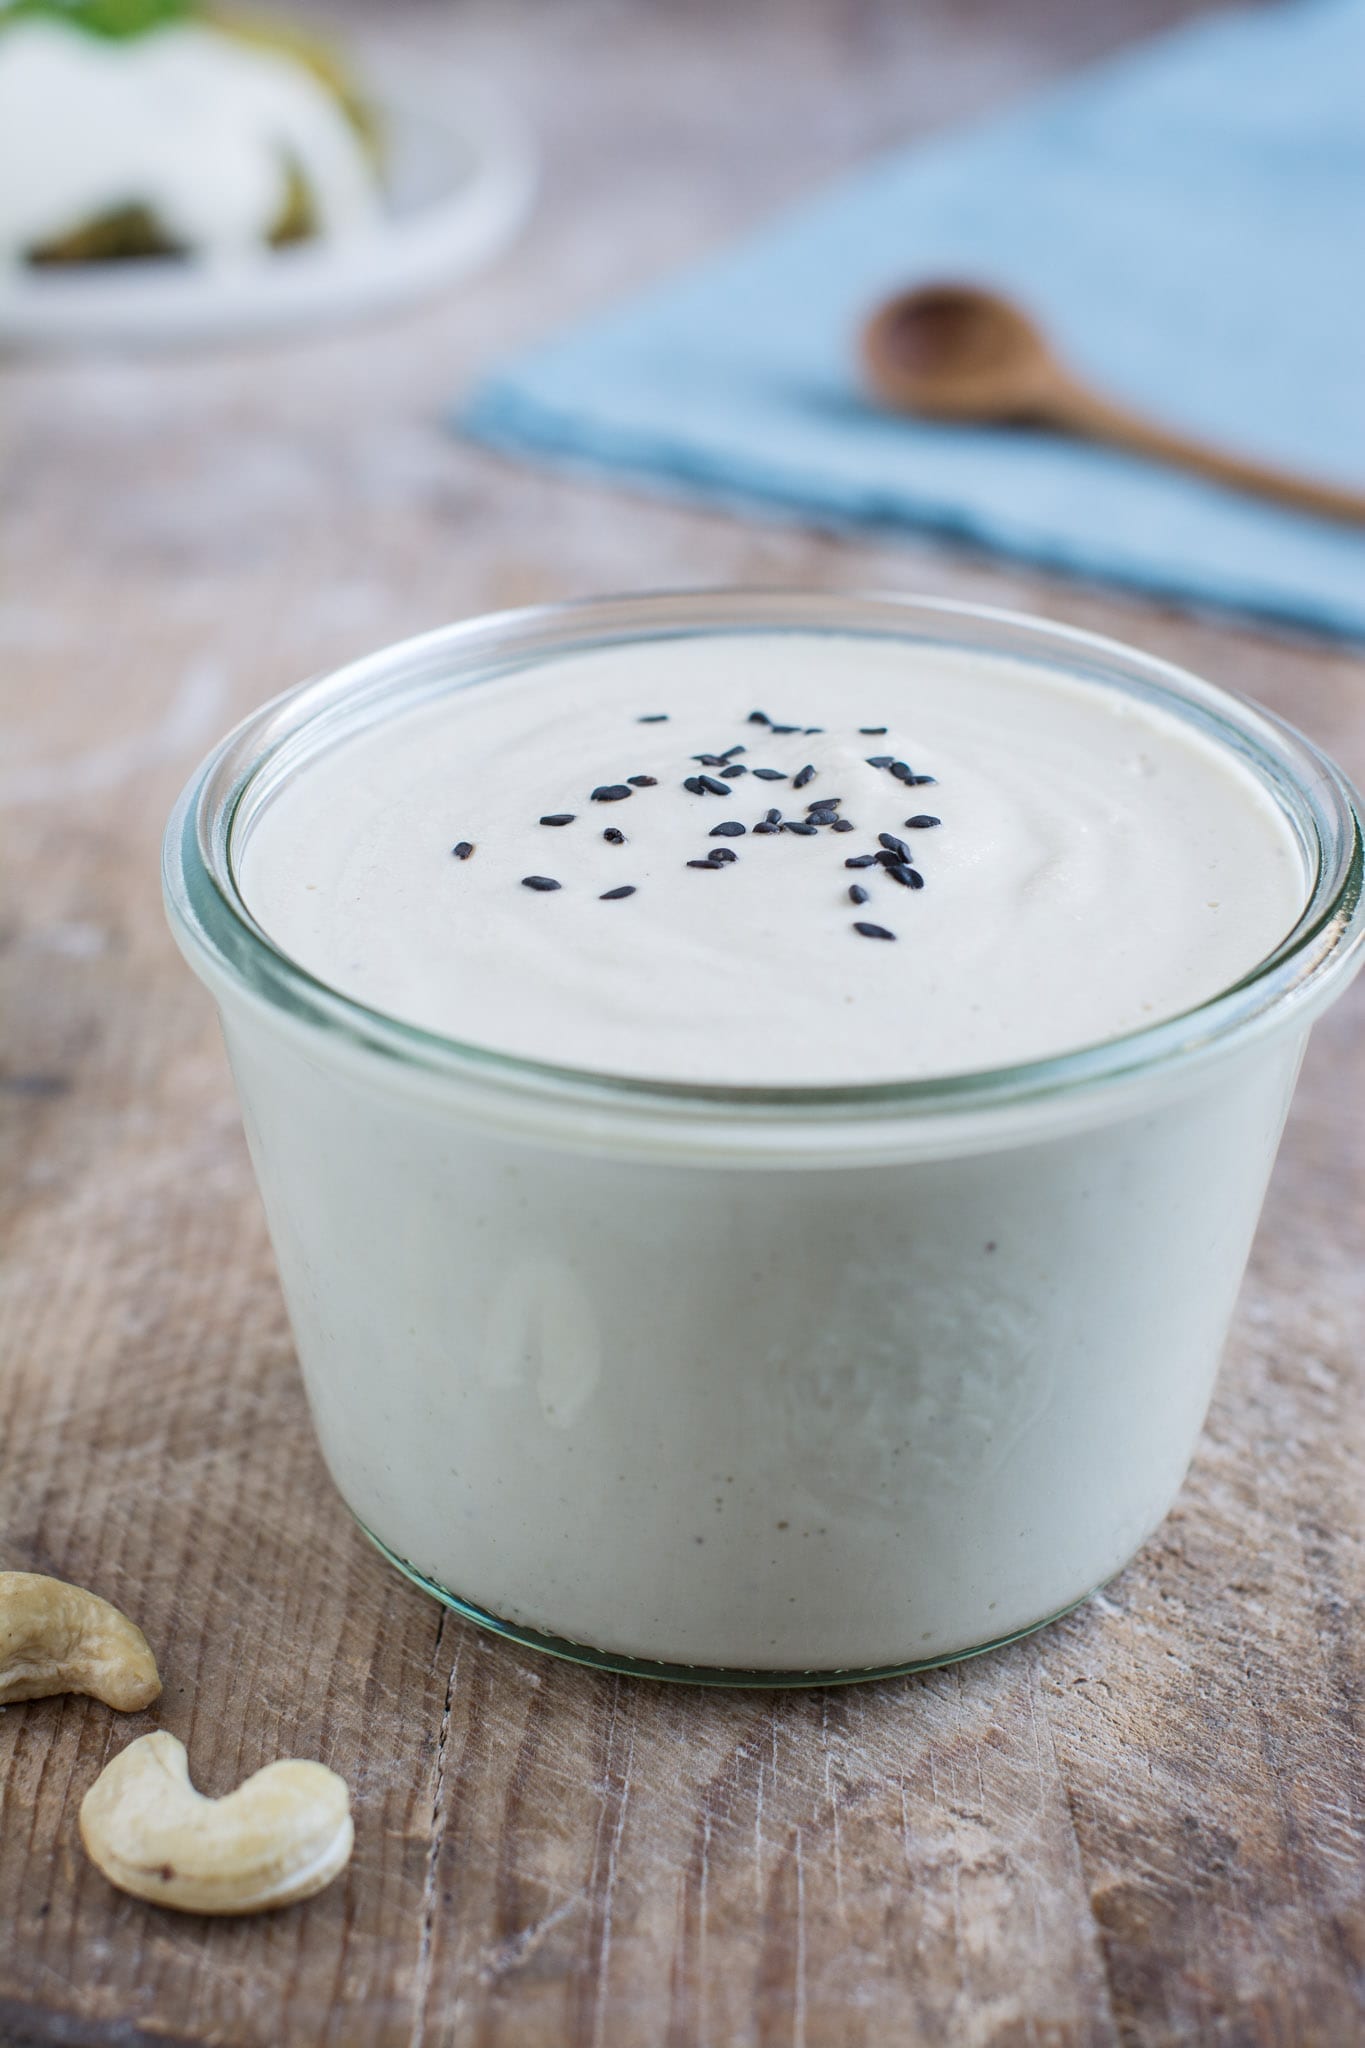 Vegan oil-free and gluten-free cashew sour cream that is quick to make and serves perfectly as dairy-free salad dressing or vegan mayonnaise in Russian potato salad.